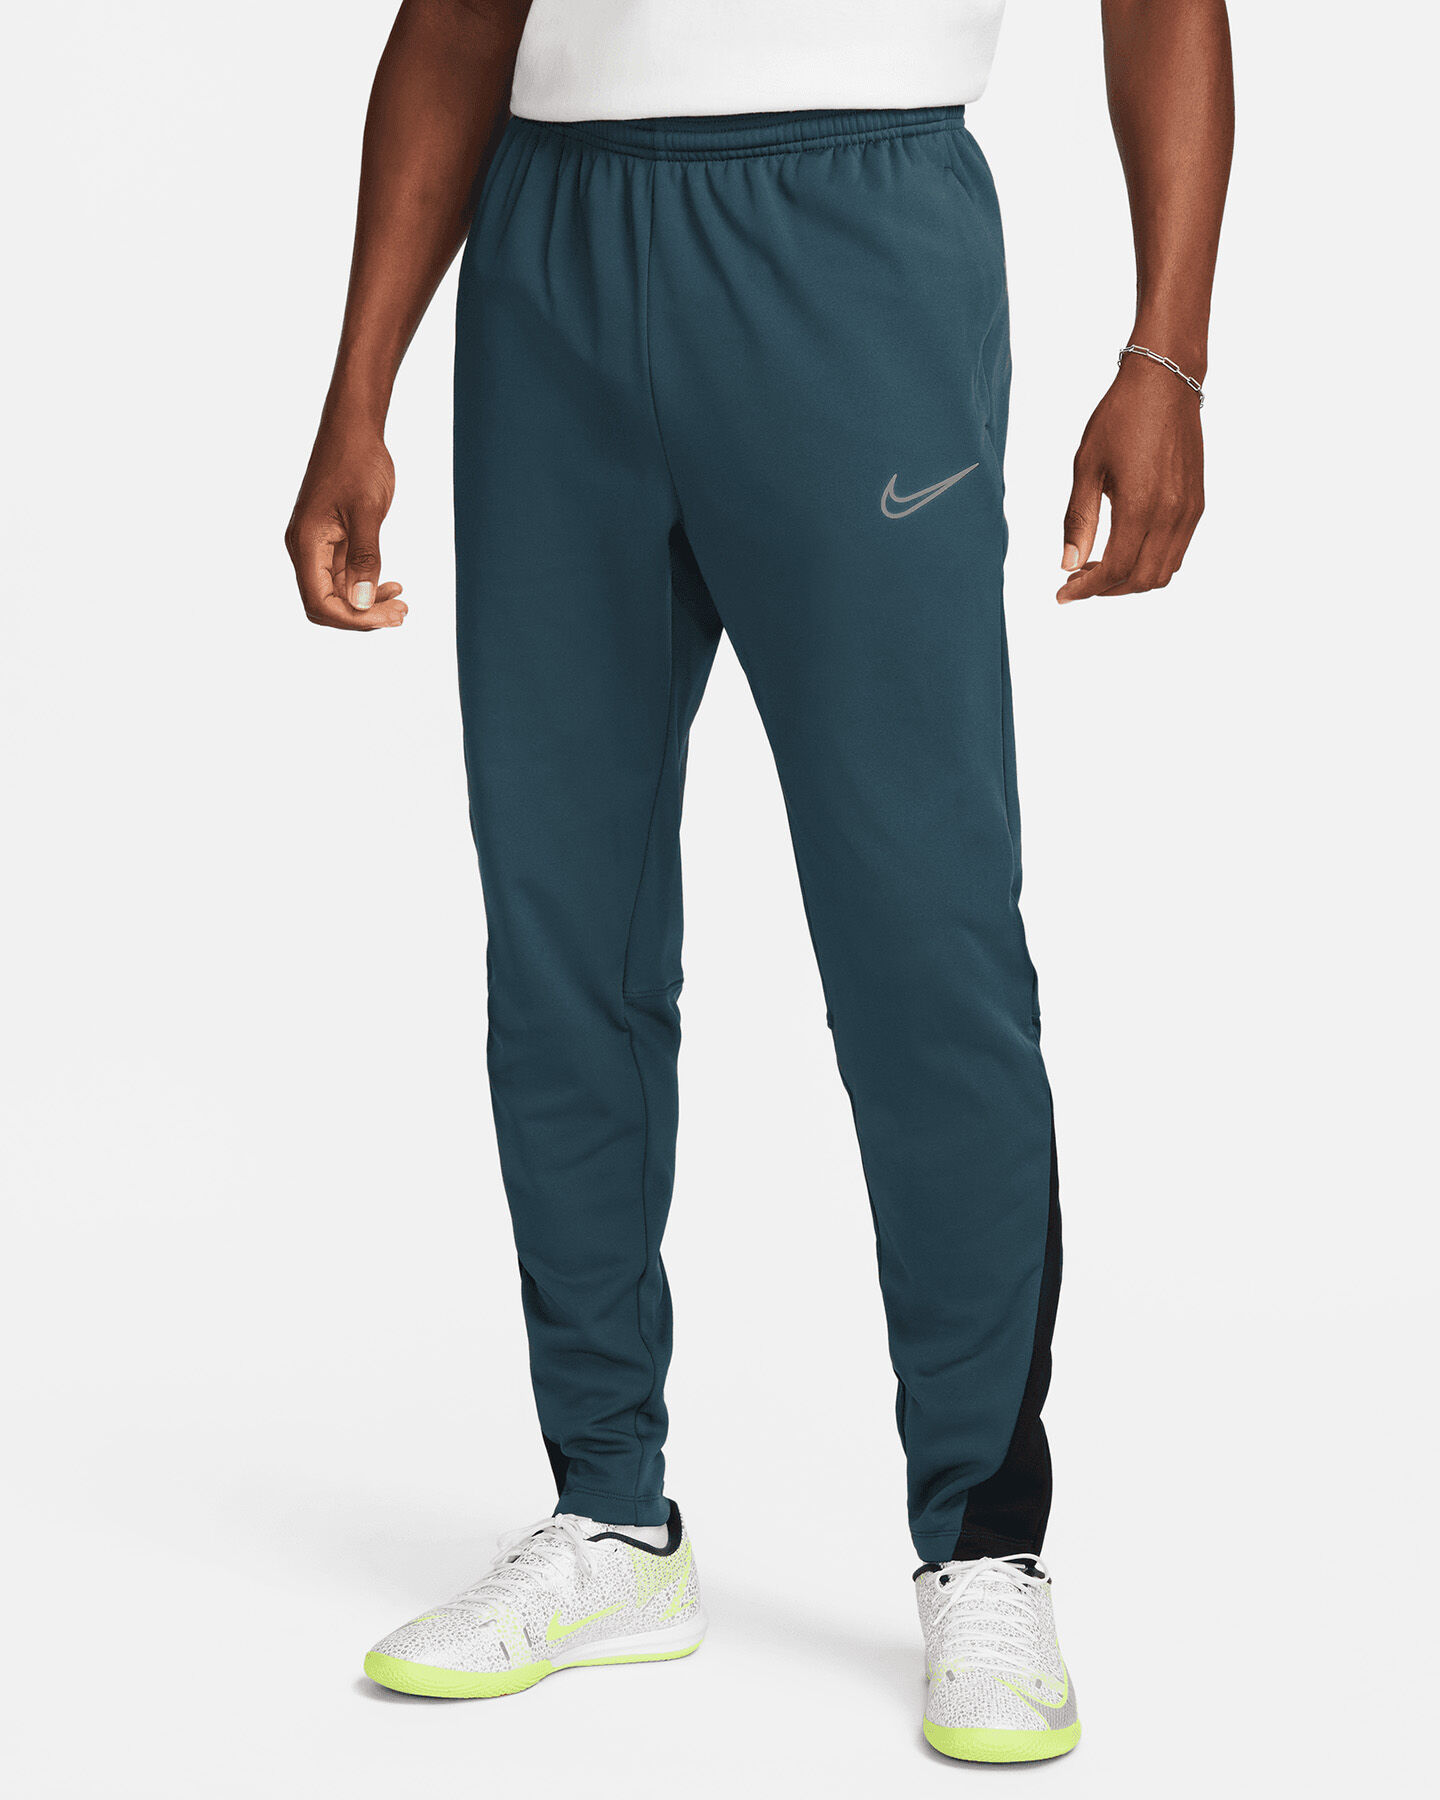  Pantaloncini calcio NIKE THERMA FIT ACADEMY SOCCER M S5620636|328|S scatto 0